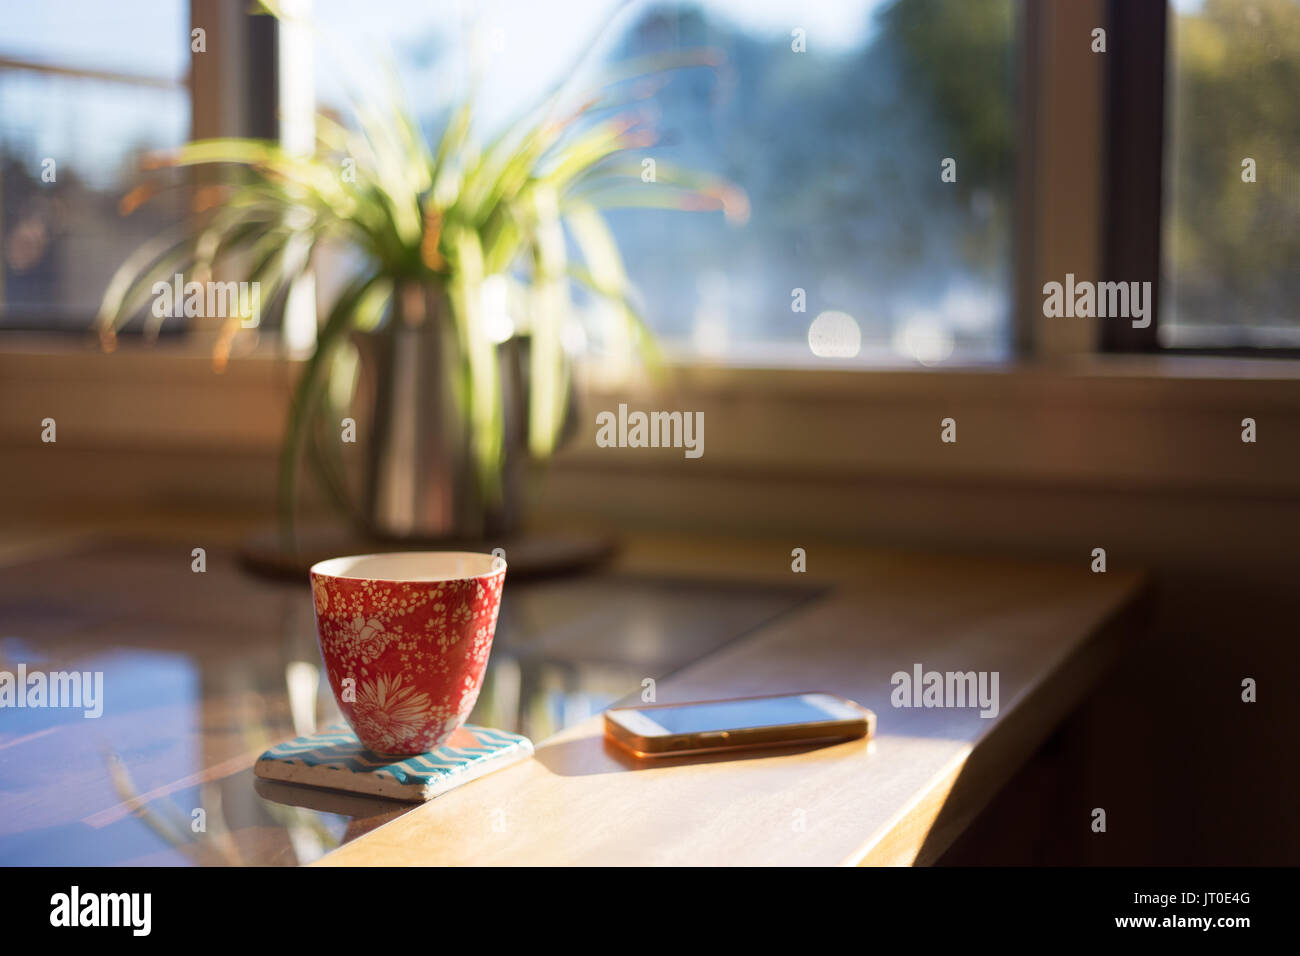 A cup of coffee on a coaster next to smart phone on table with bright morning window light streaming through. Stock Photo